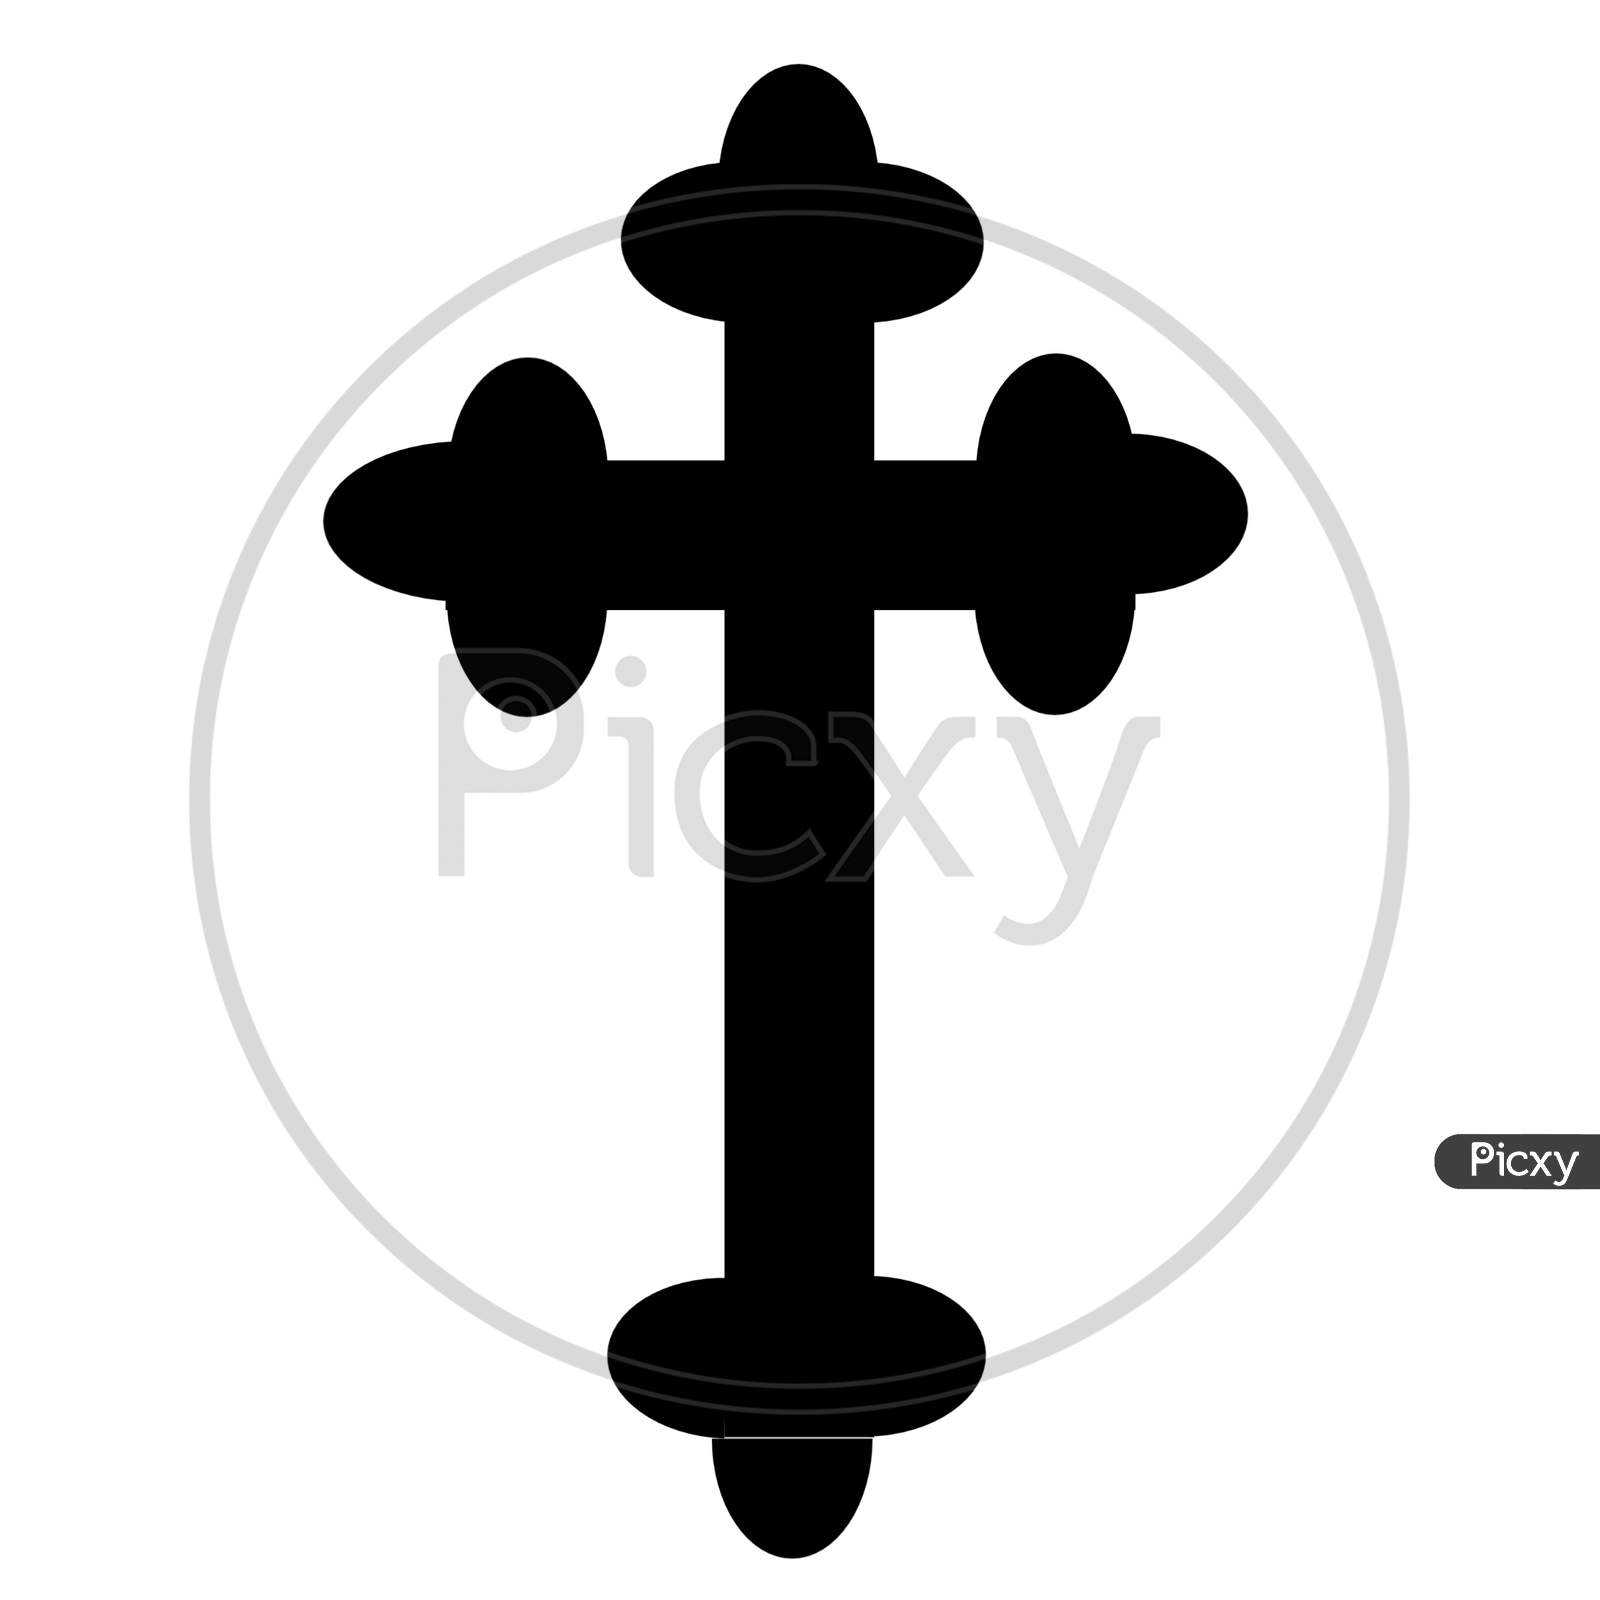 Budded Cross Symbol With White Background. Christian very old cross symbol.